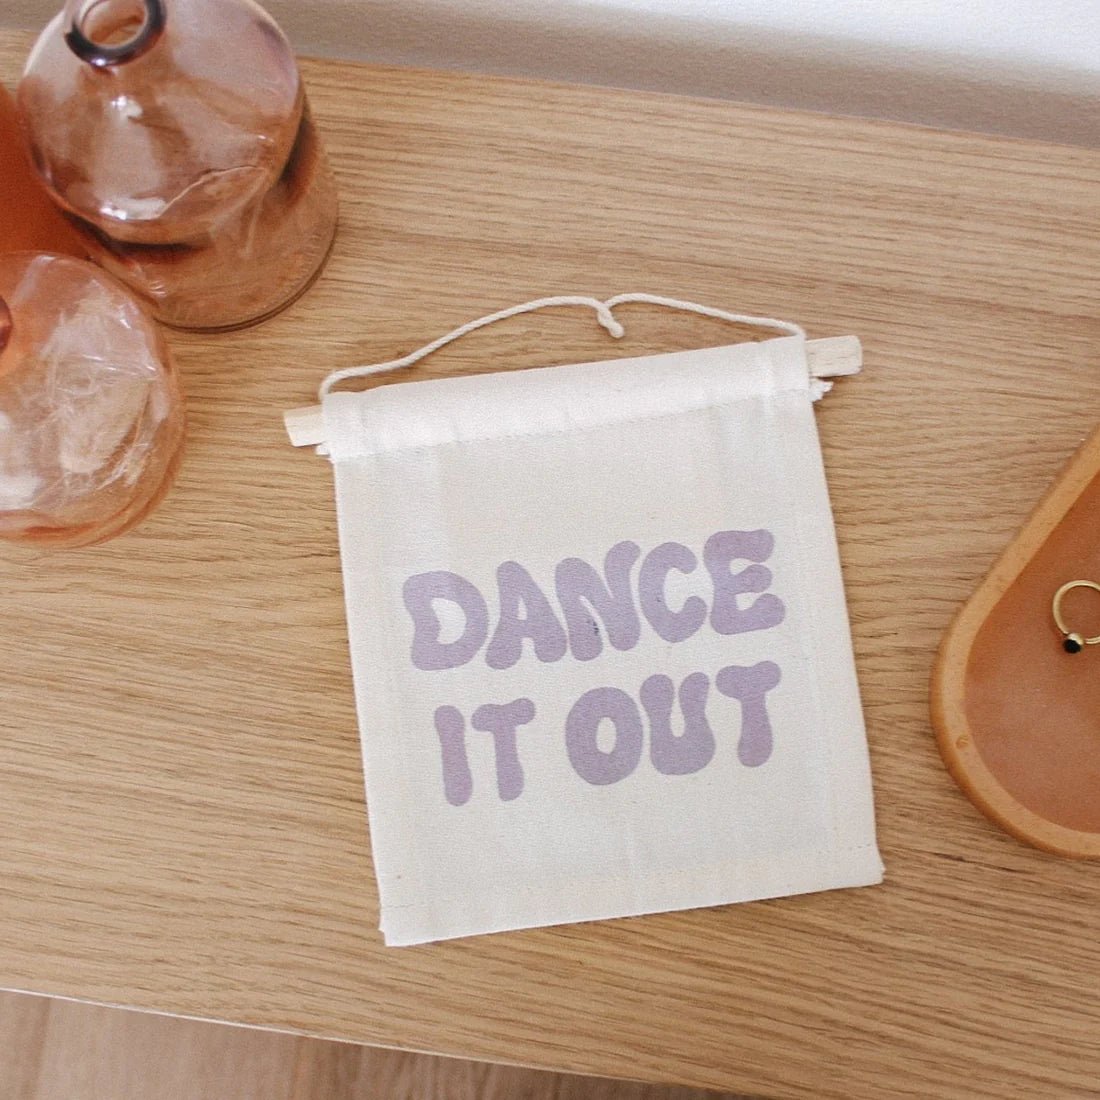 Dance It Out Hang Sign by Imani Collective - Maude Kids Decor